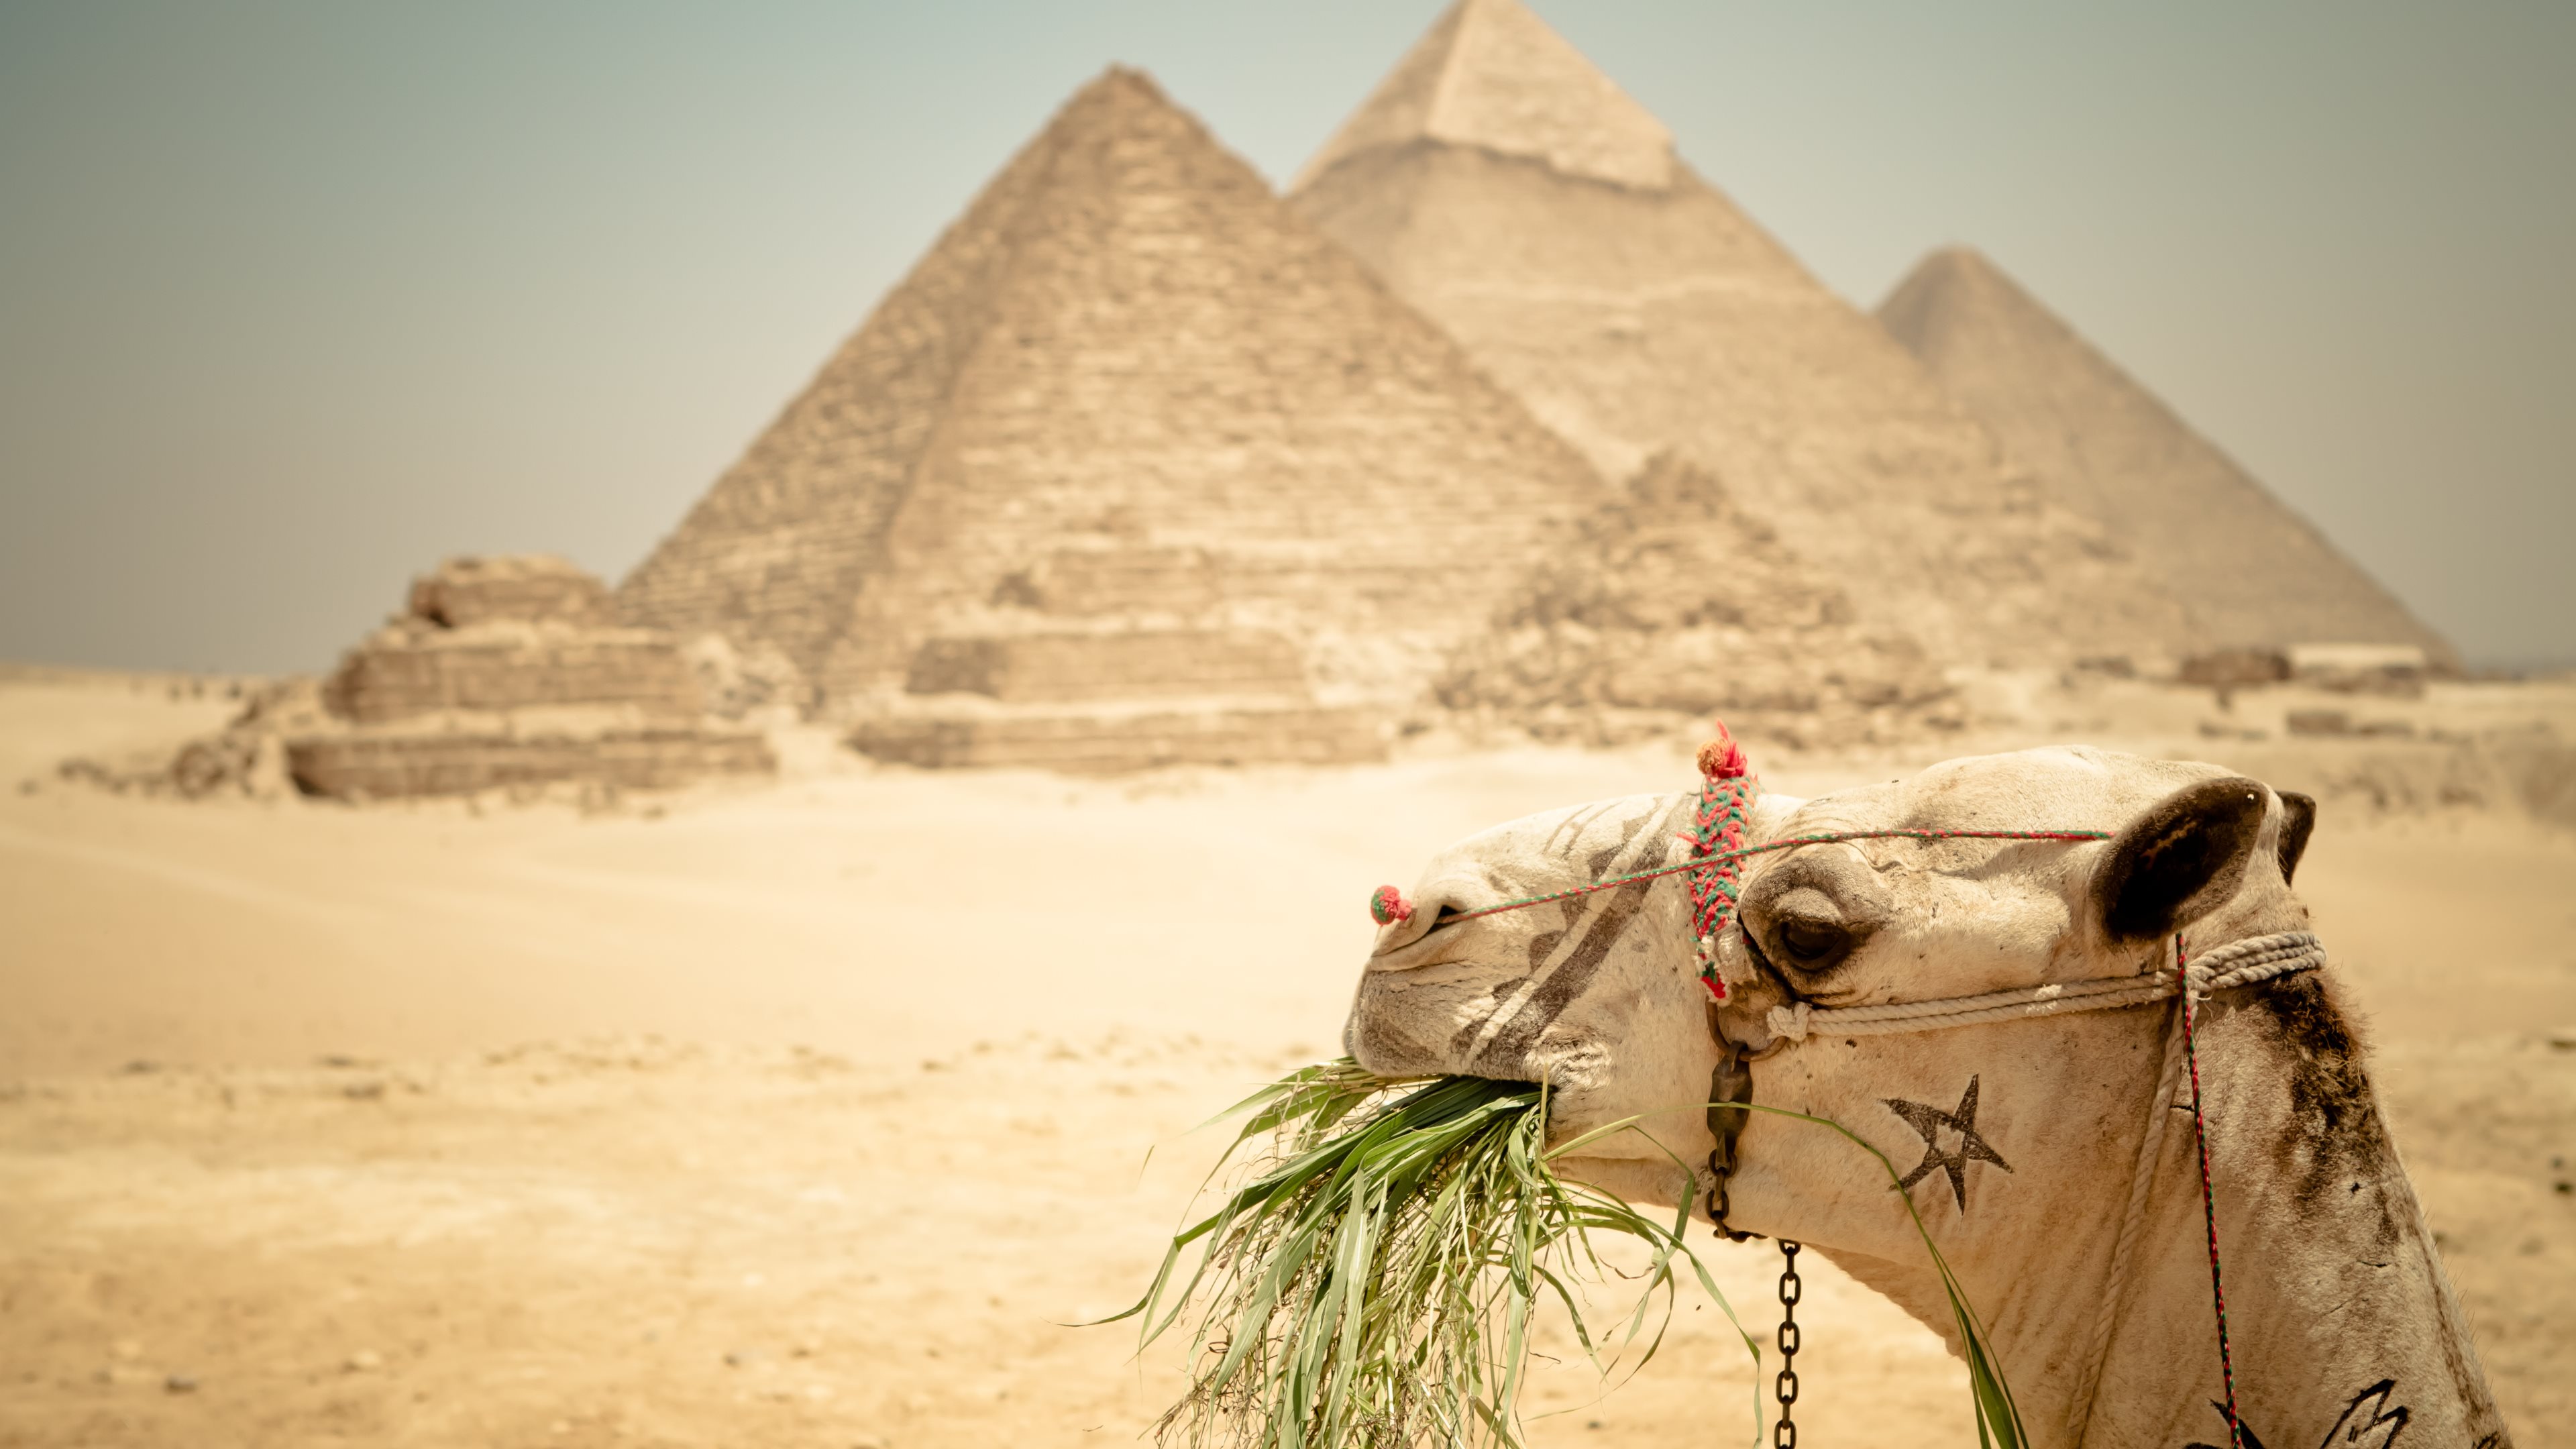 Cairo And Luxor Tours From El Gouna - Great Pyramid Of Giza , HD Wallpaper & Backgrounds